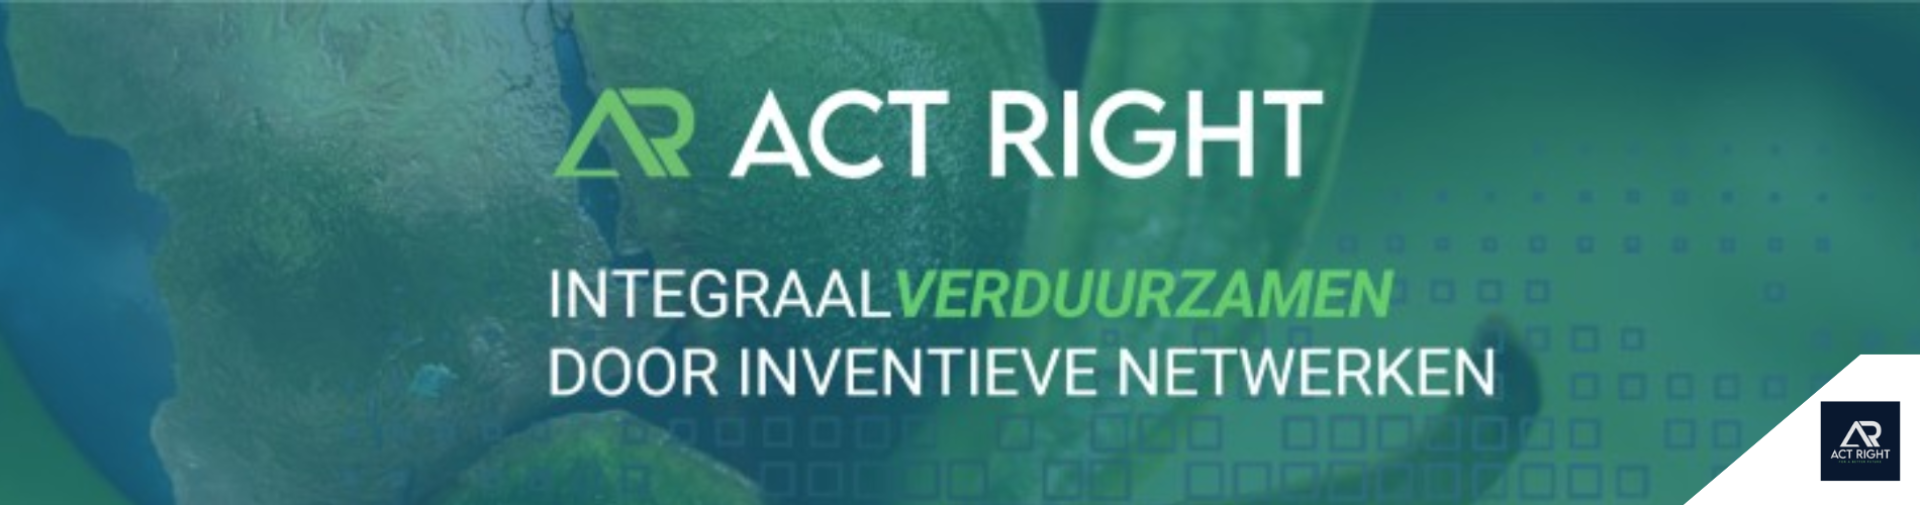 Act_right_banner